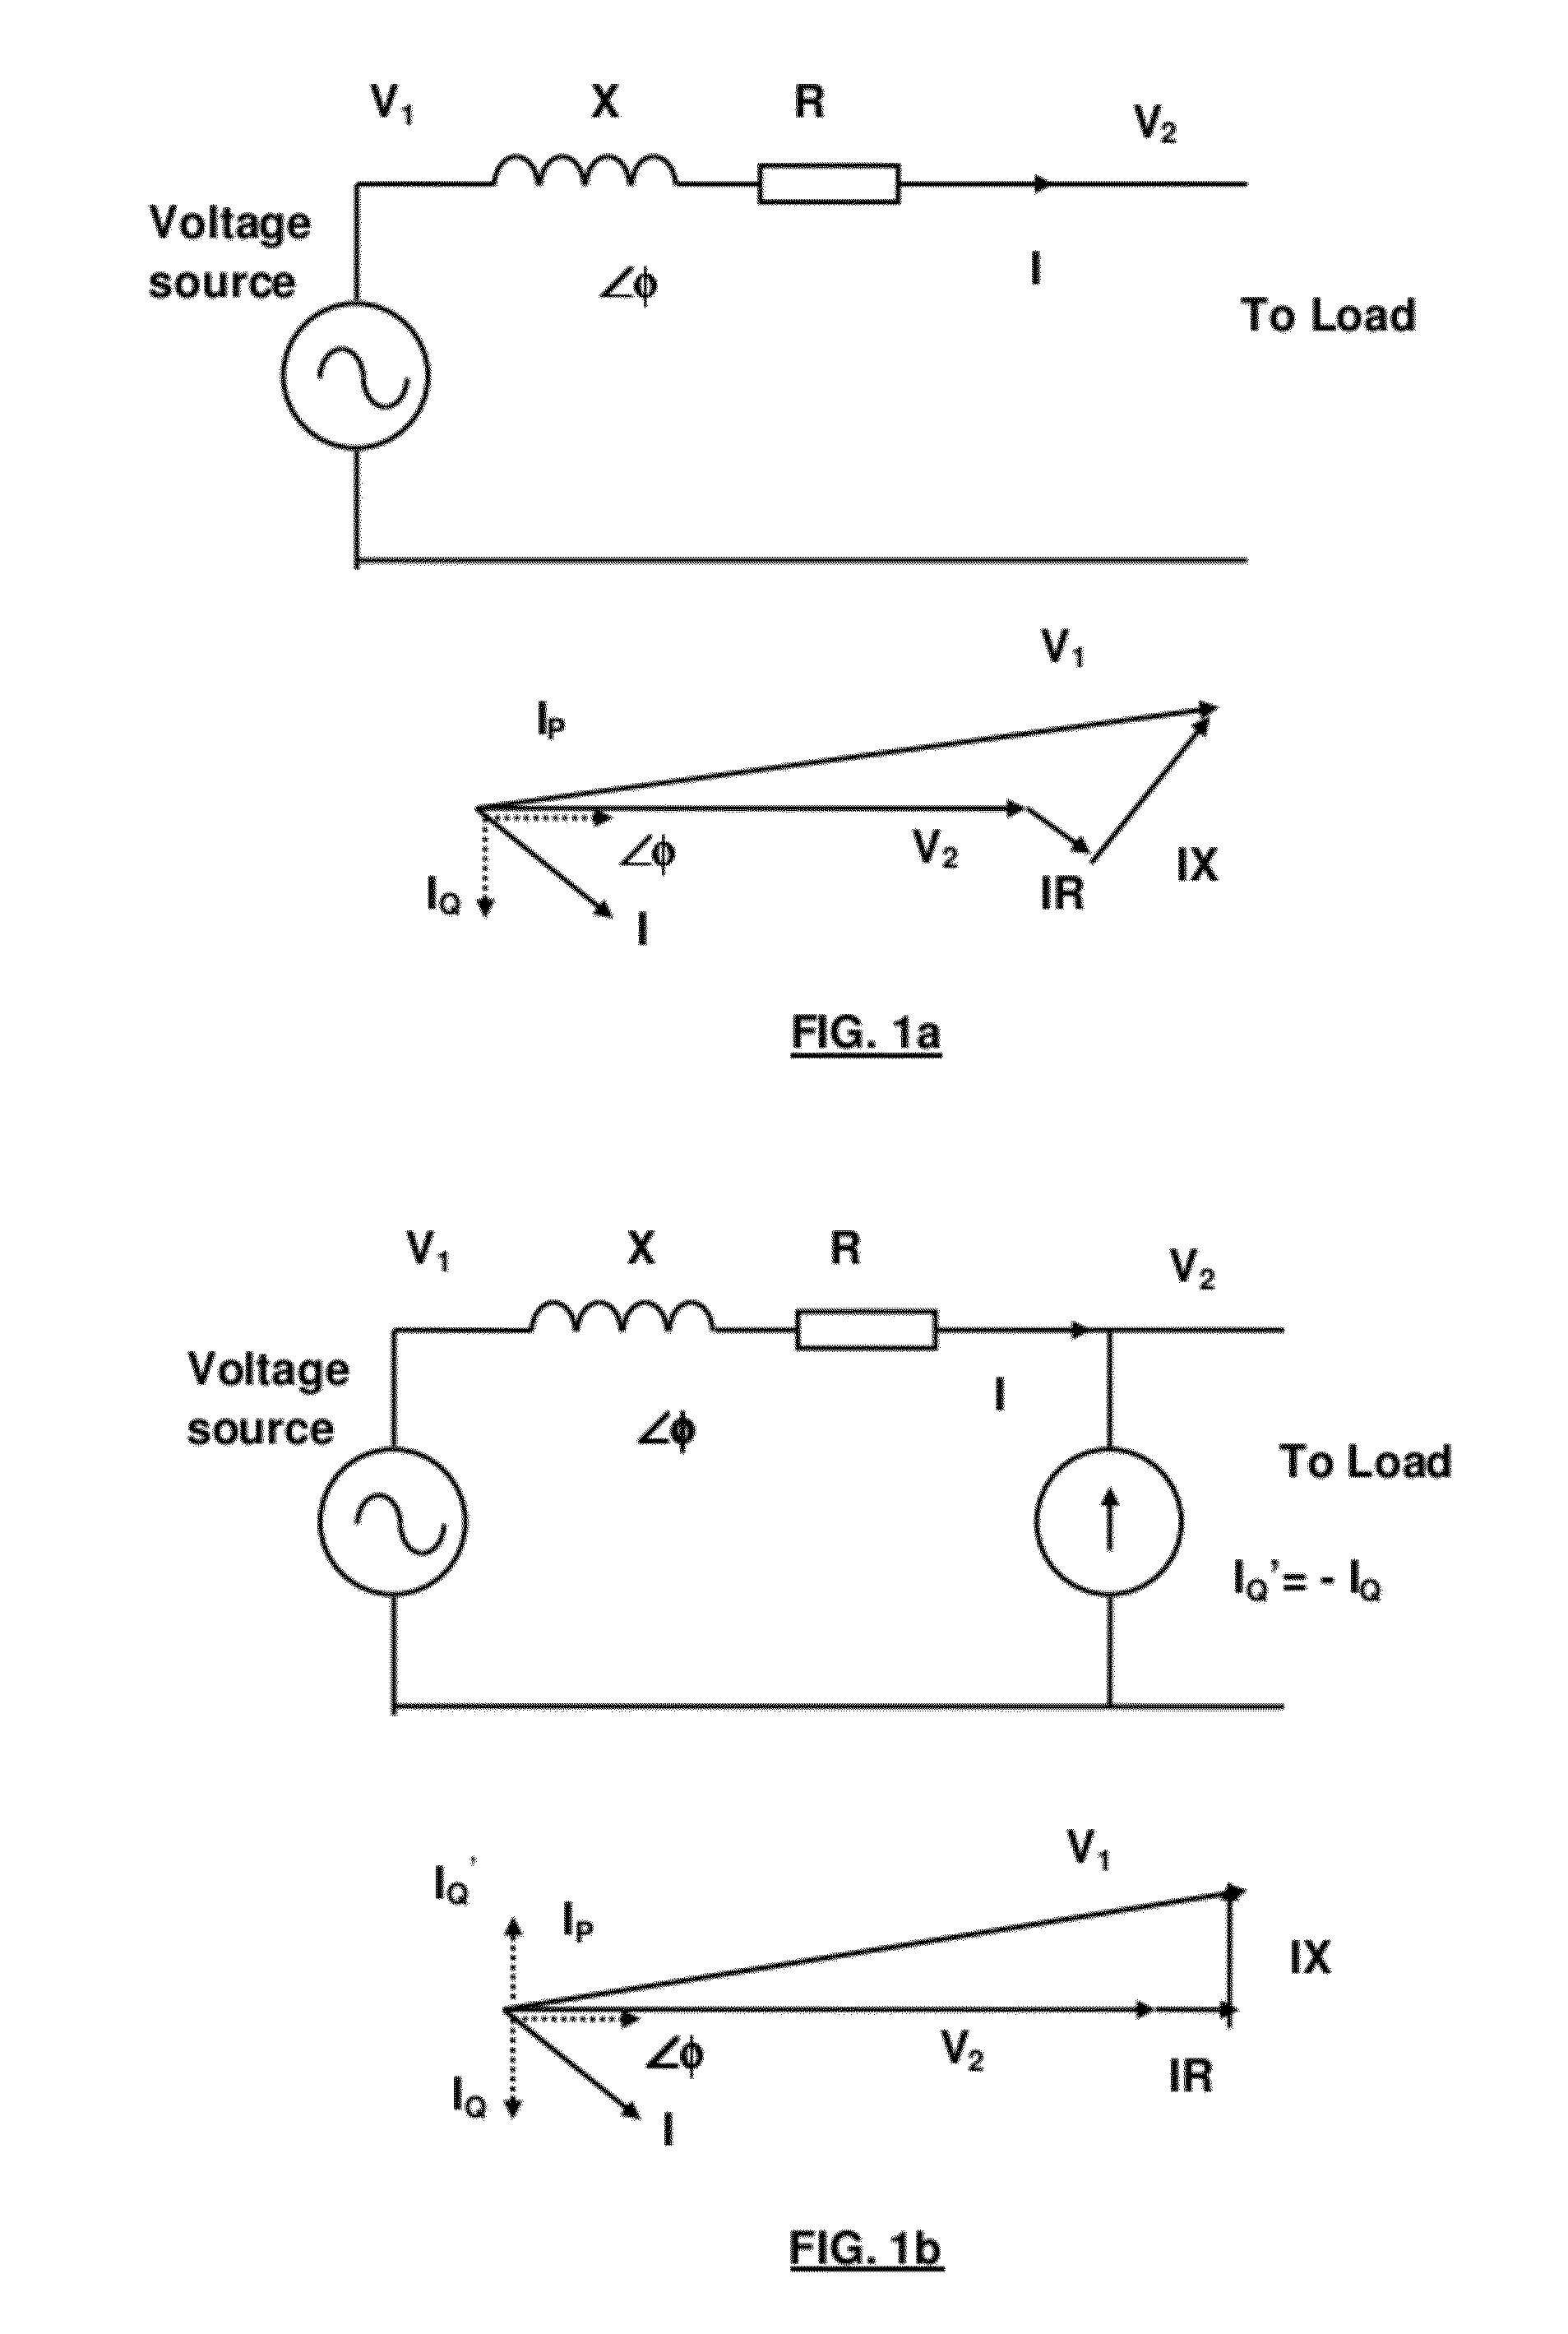 Power control circuit and method for stabilizing a power supply